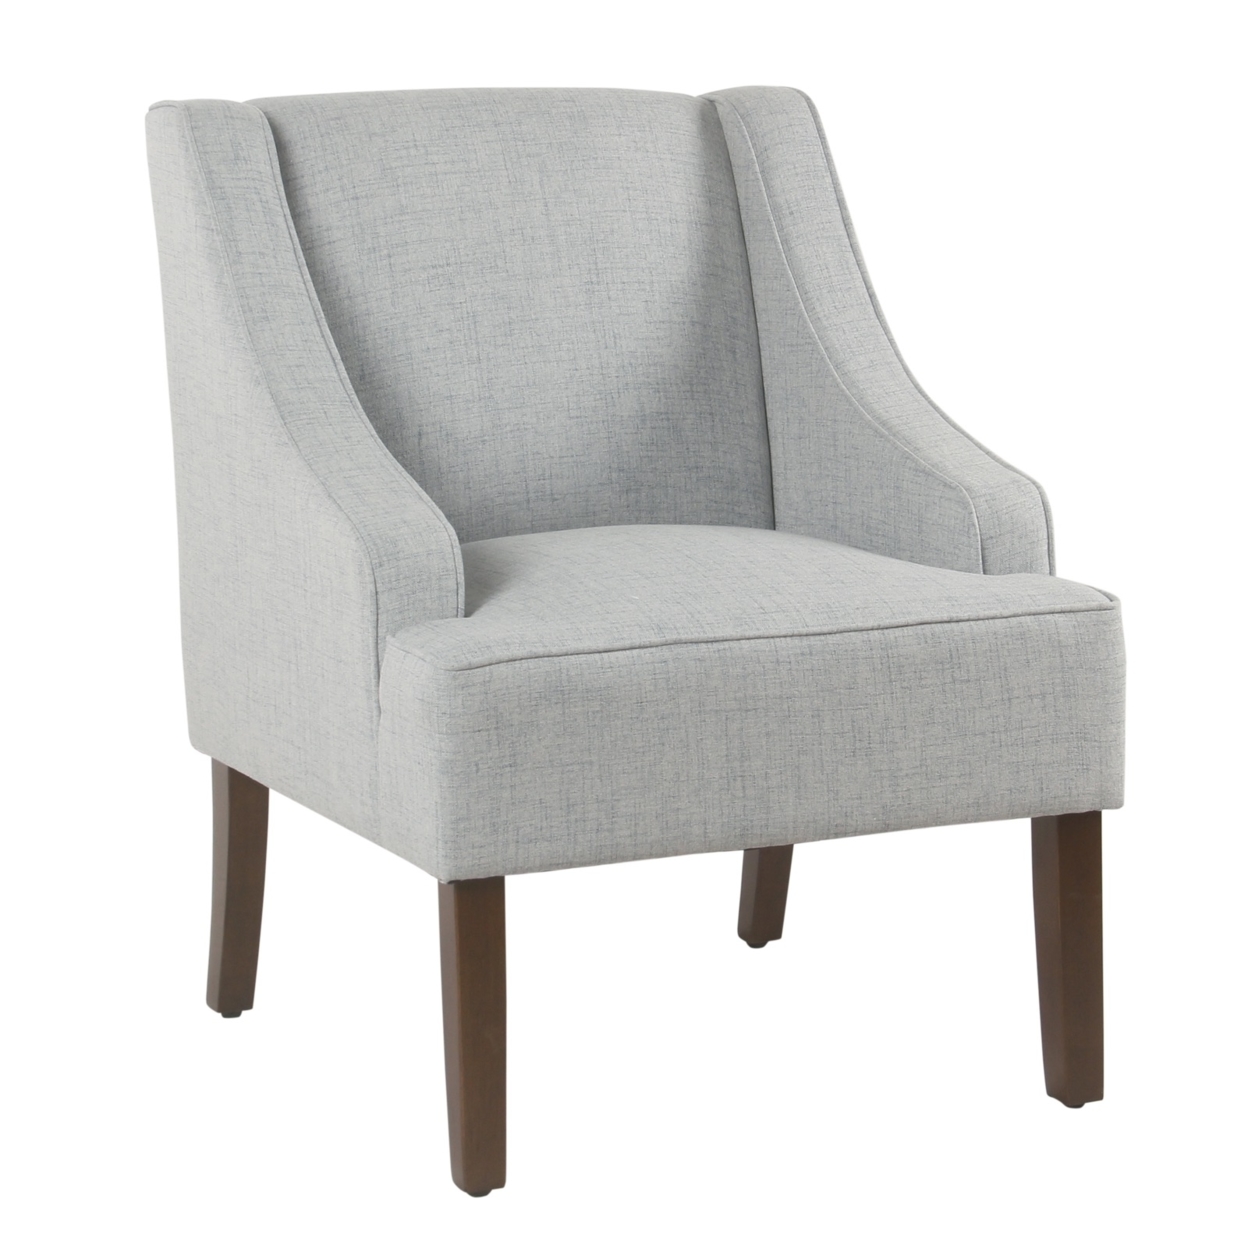 Modern Fabric Upholstered Wooden Accent Chair With Swooping Armrests, Blue And Brown- Saltoro Sherpi